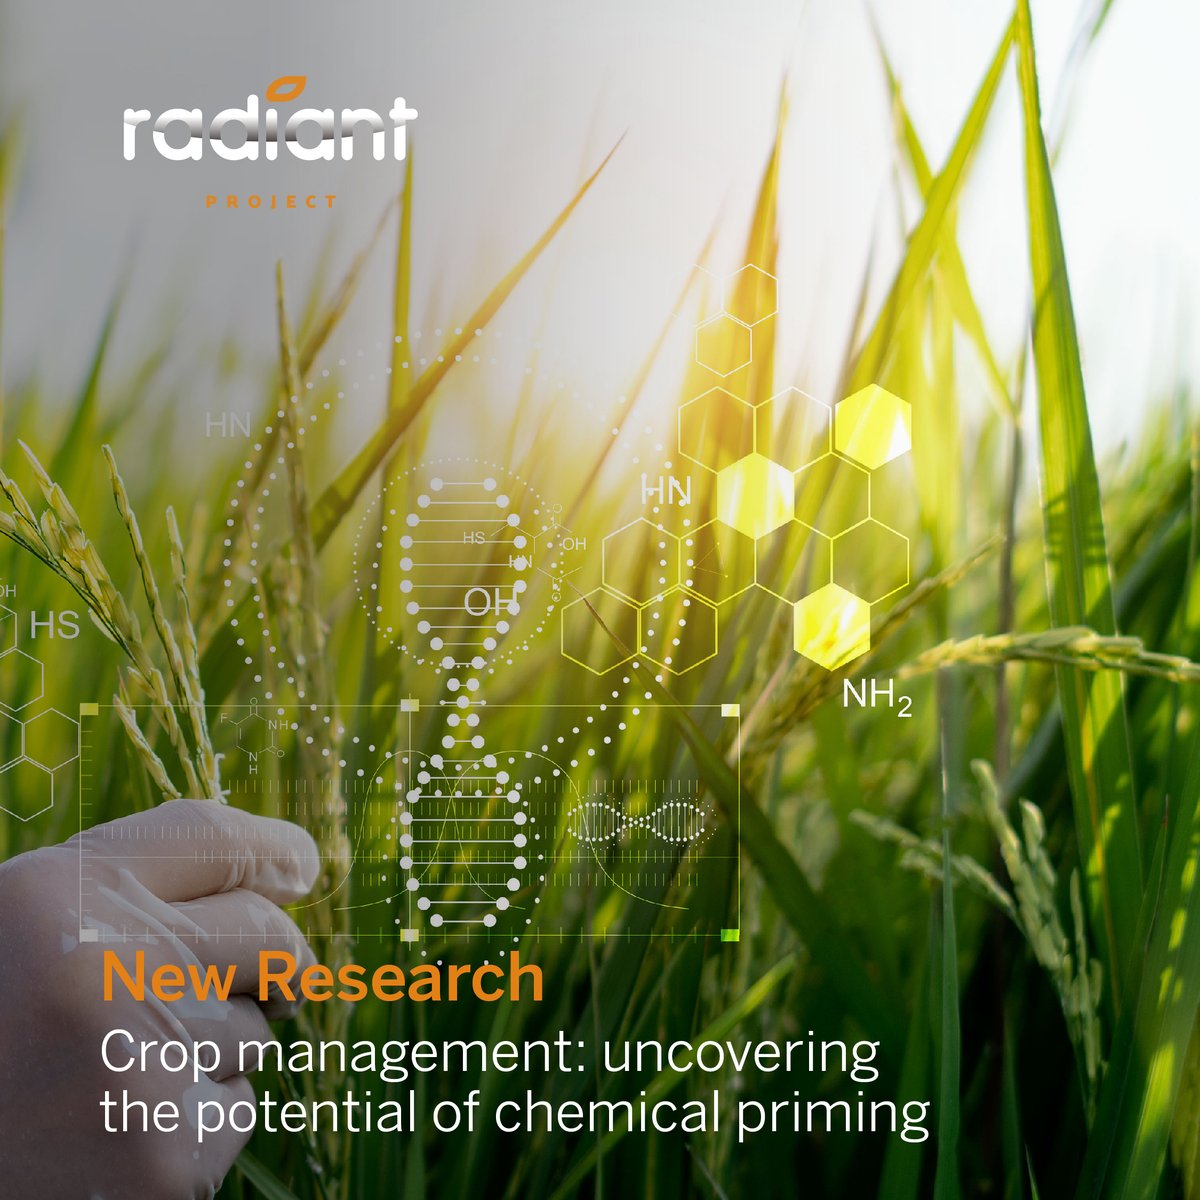 Chemical priming has reached #Radiant status! Recent research has taken to exploring the potential of different nanocarriers as potential priming agents for this method, aiming to increasing agricultural sustainability. #RADIANT #ChemicalPriming #Nanotech #Agriculture